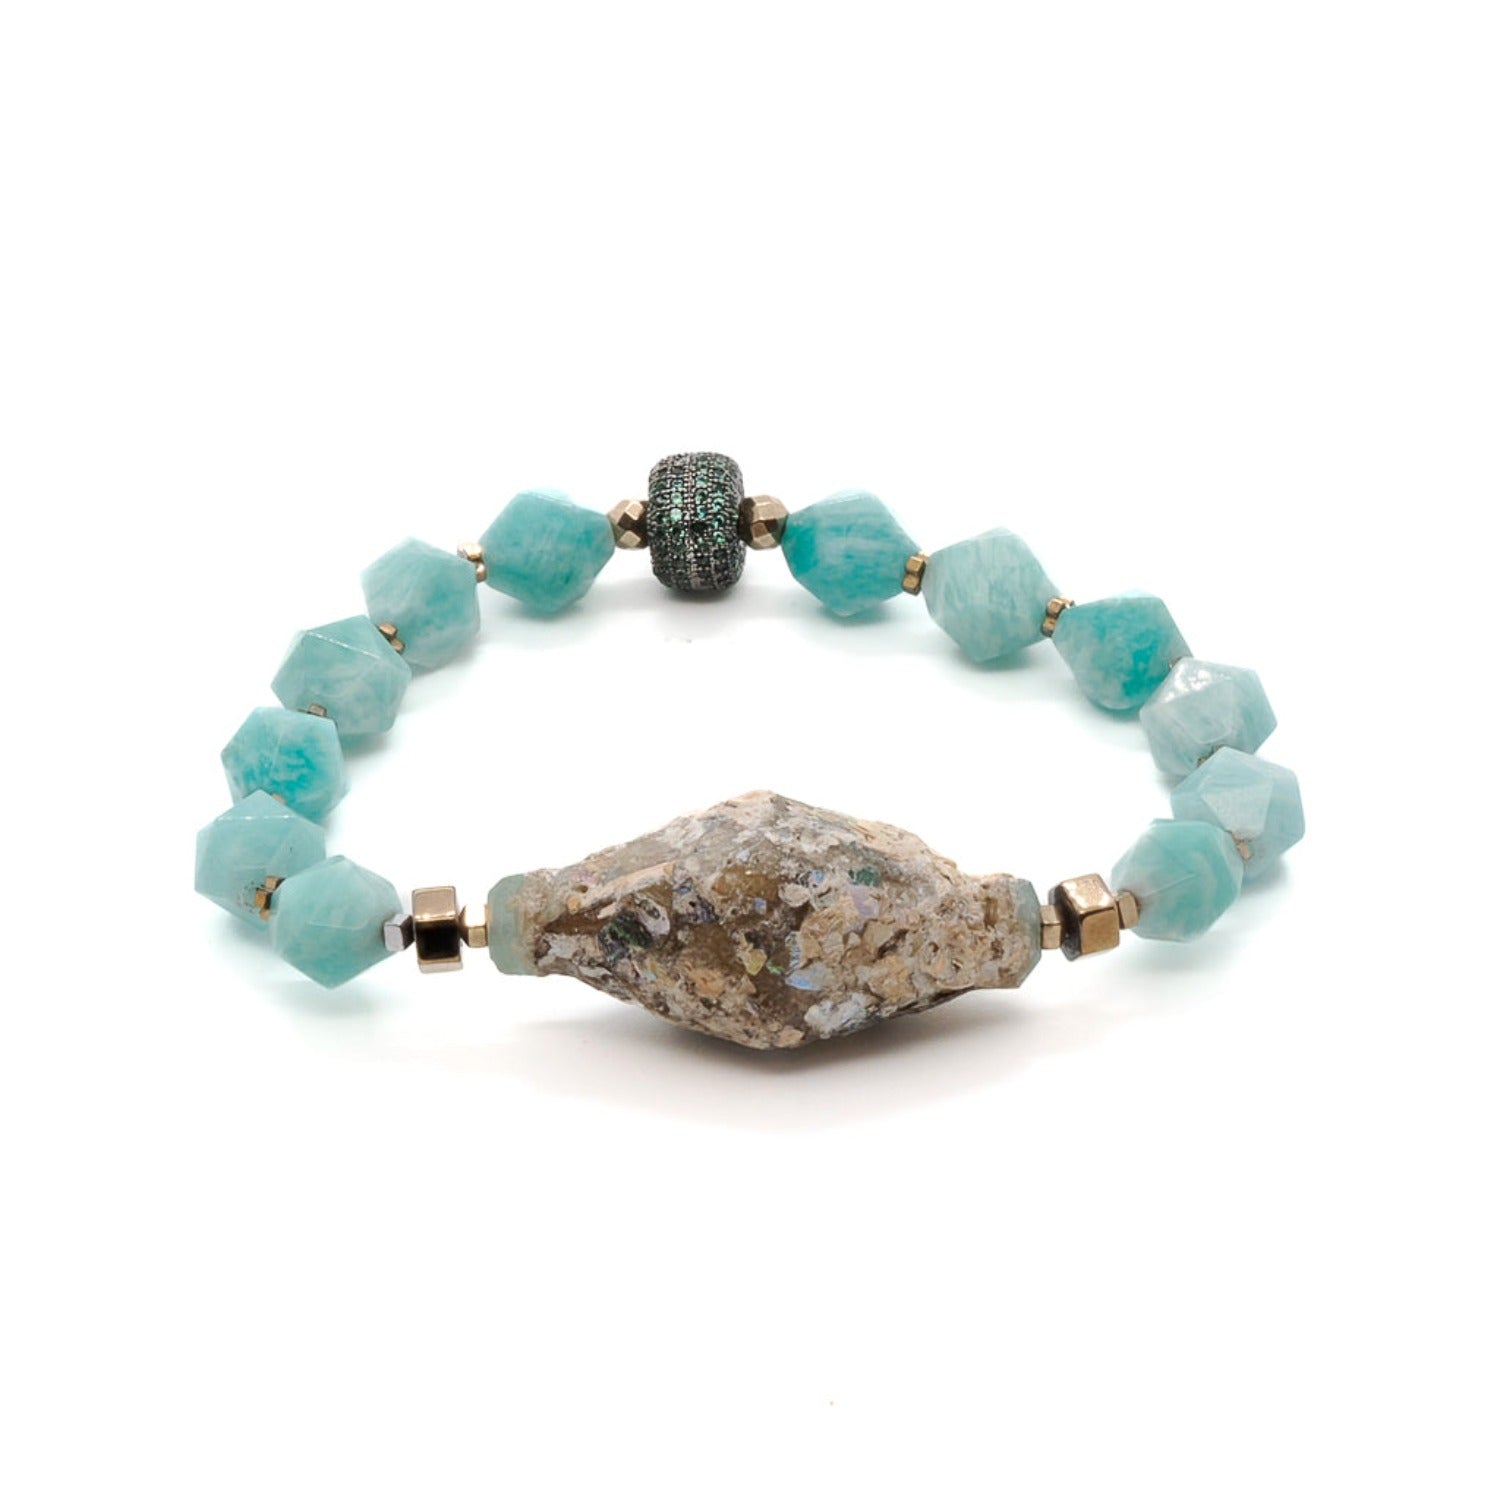 The Historical Bracelet, featuring a captivating blend of larimar, gold hematite, and a multicolor glass bead.